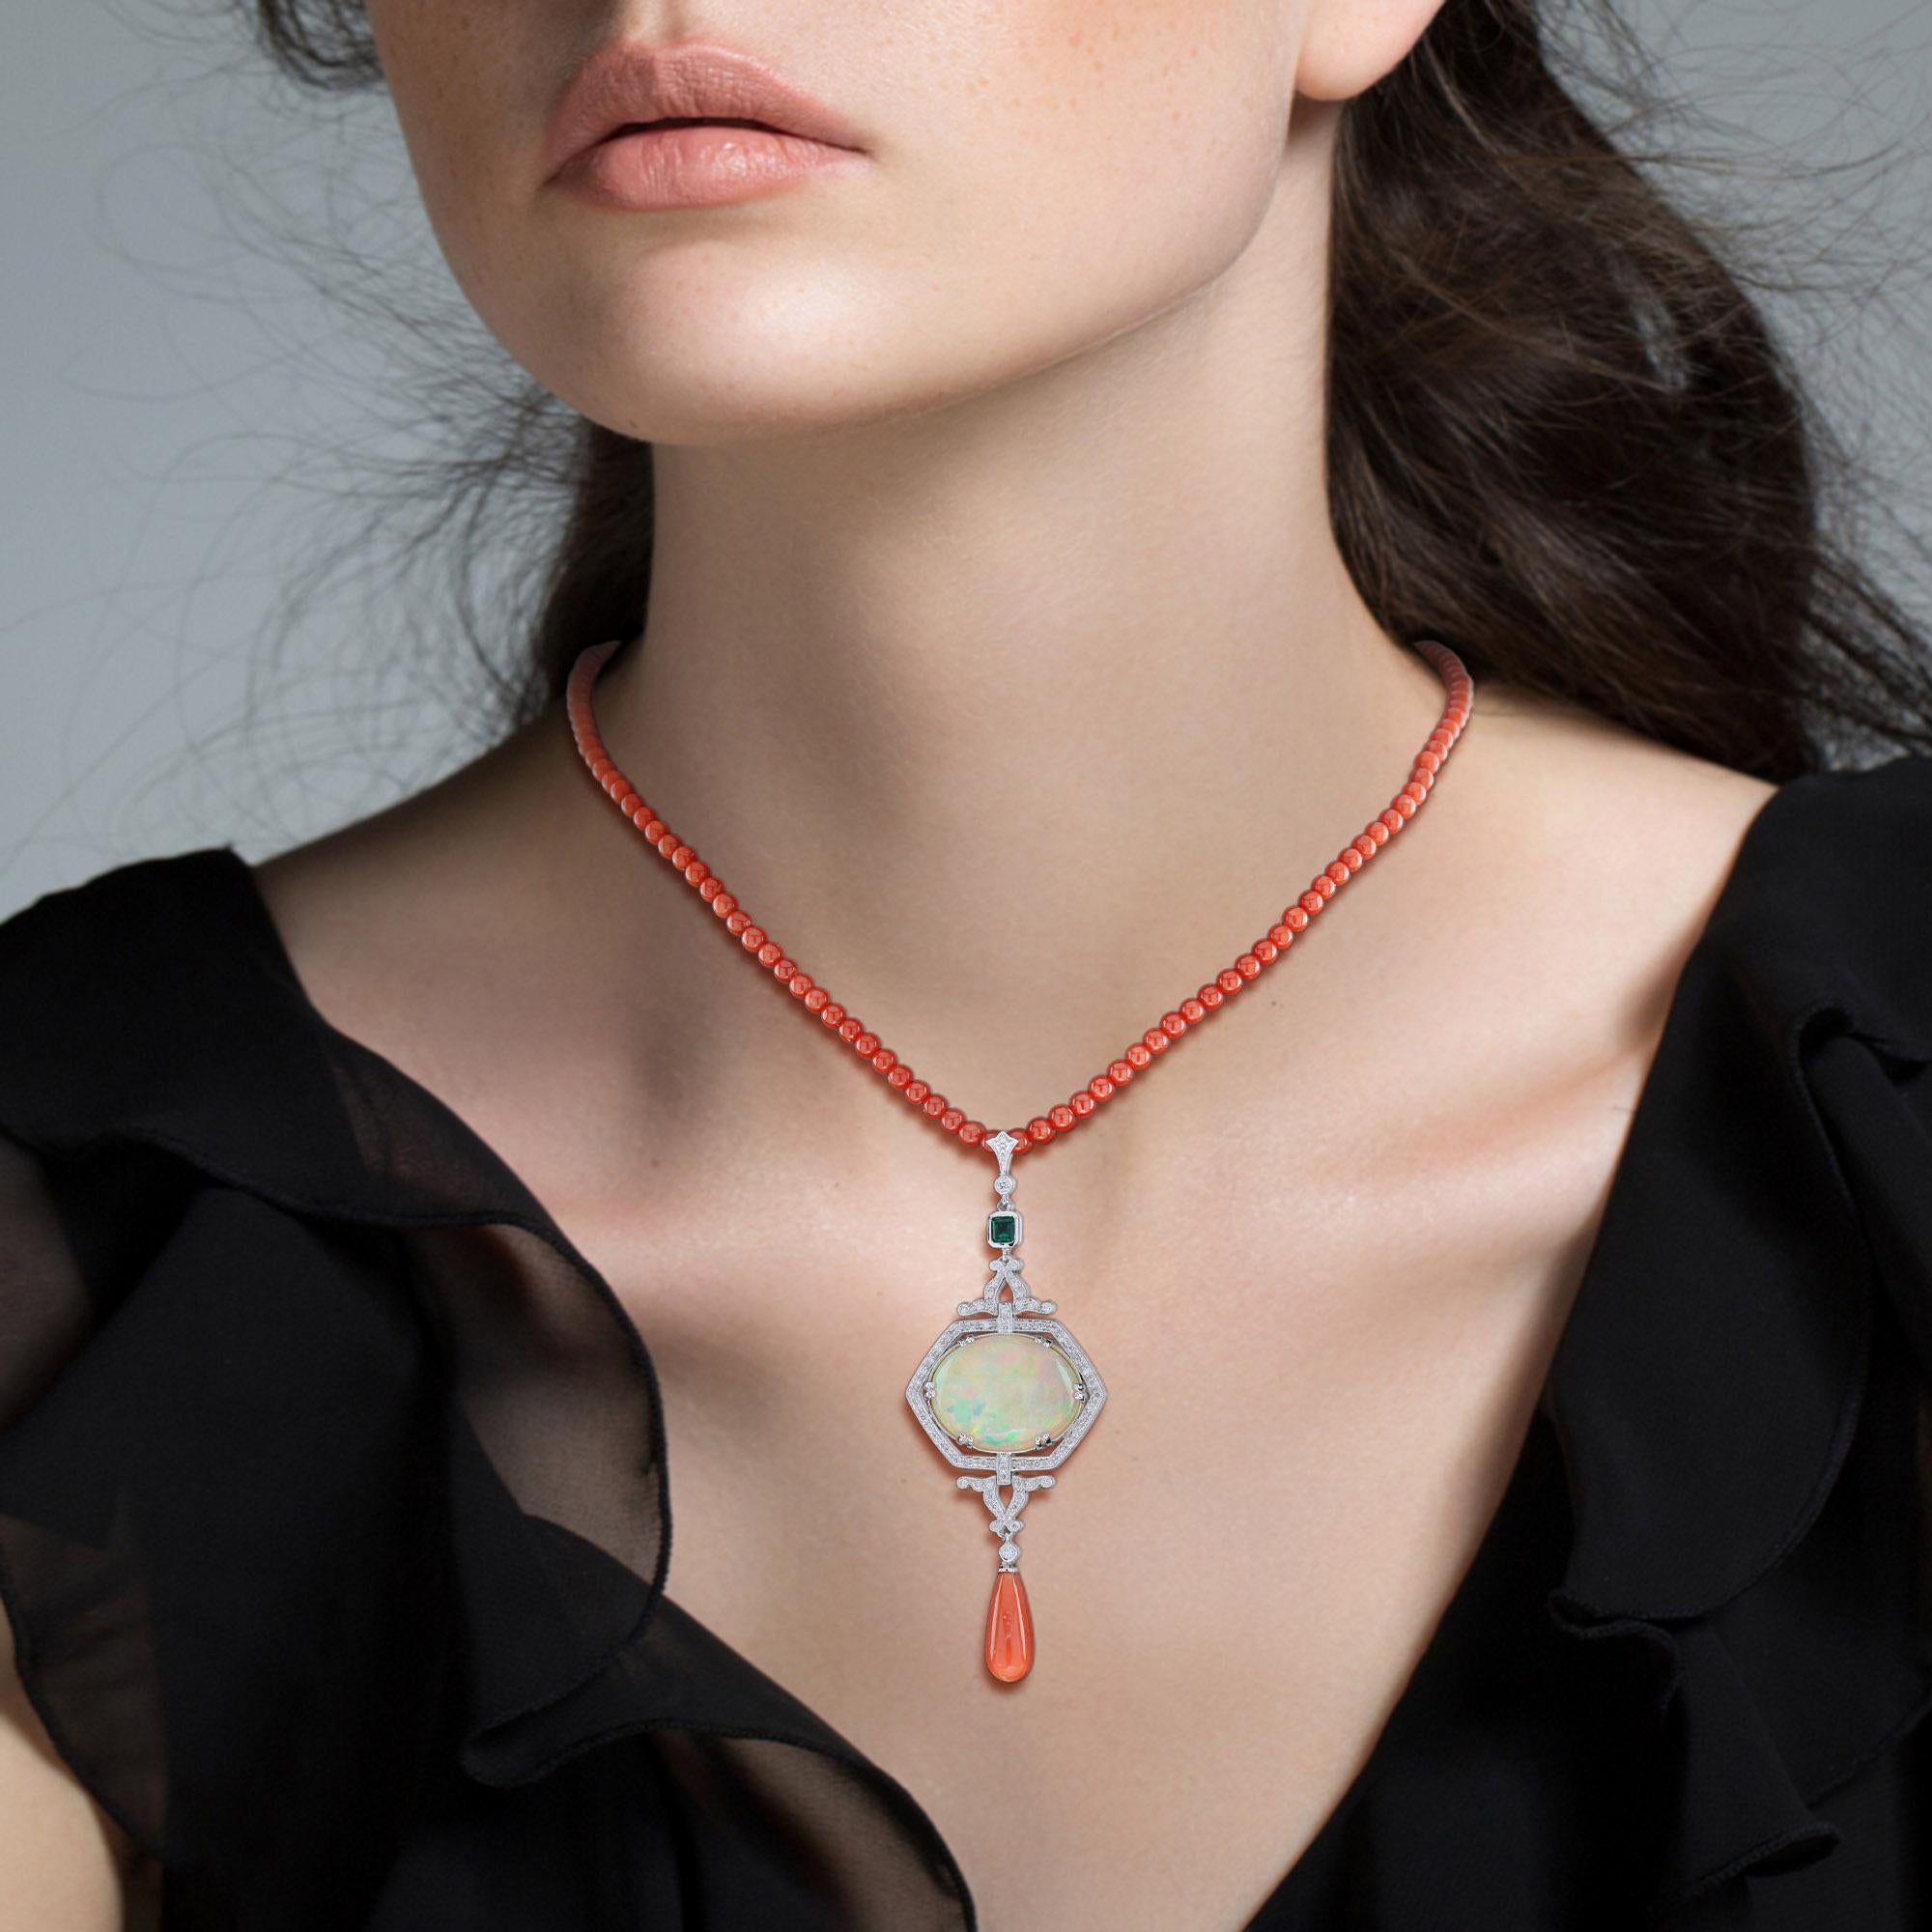 A significant, irregularly cut, oval Ethiopian opal exhibiting a blue, green, yellow, and orange color palette is ensconced in this fabulous and versatile pendant necklace. An elegance frame surround the opal is decorated with total of 12.42 carat